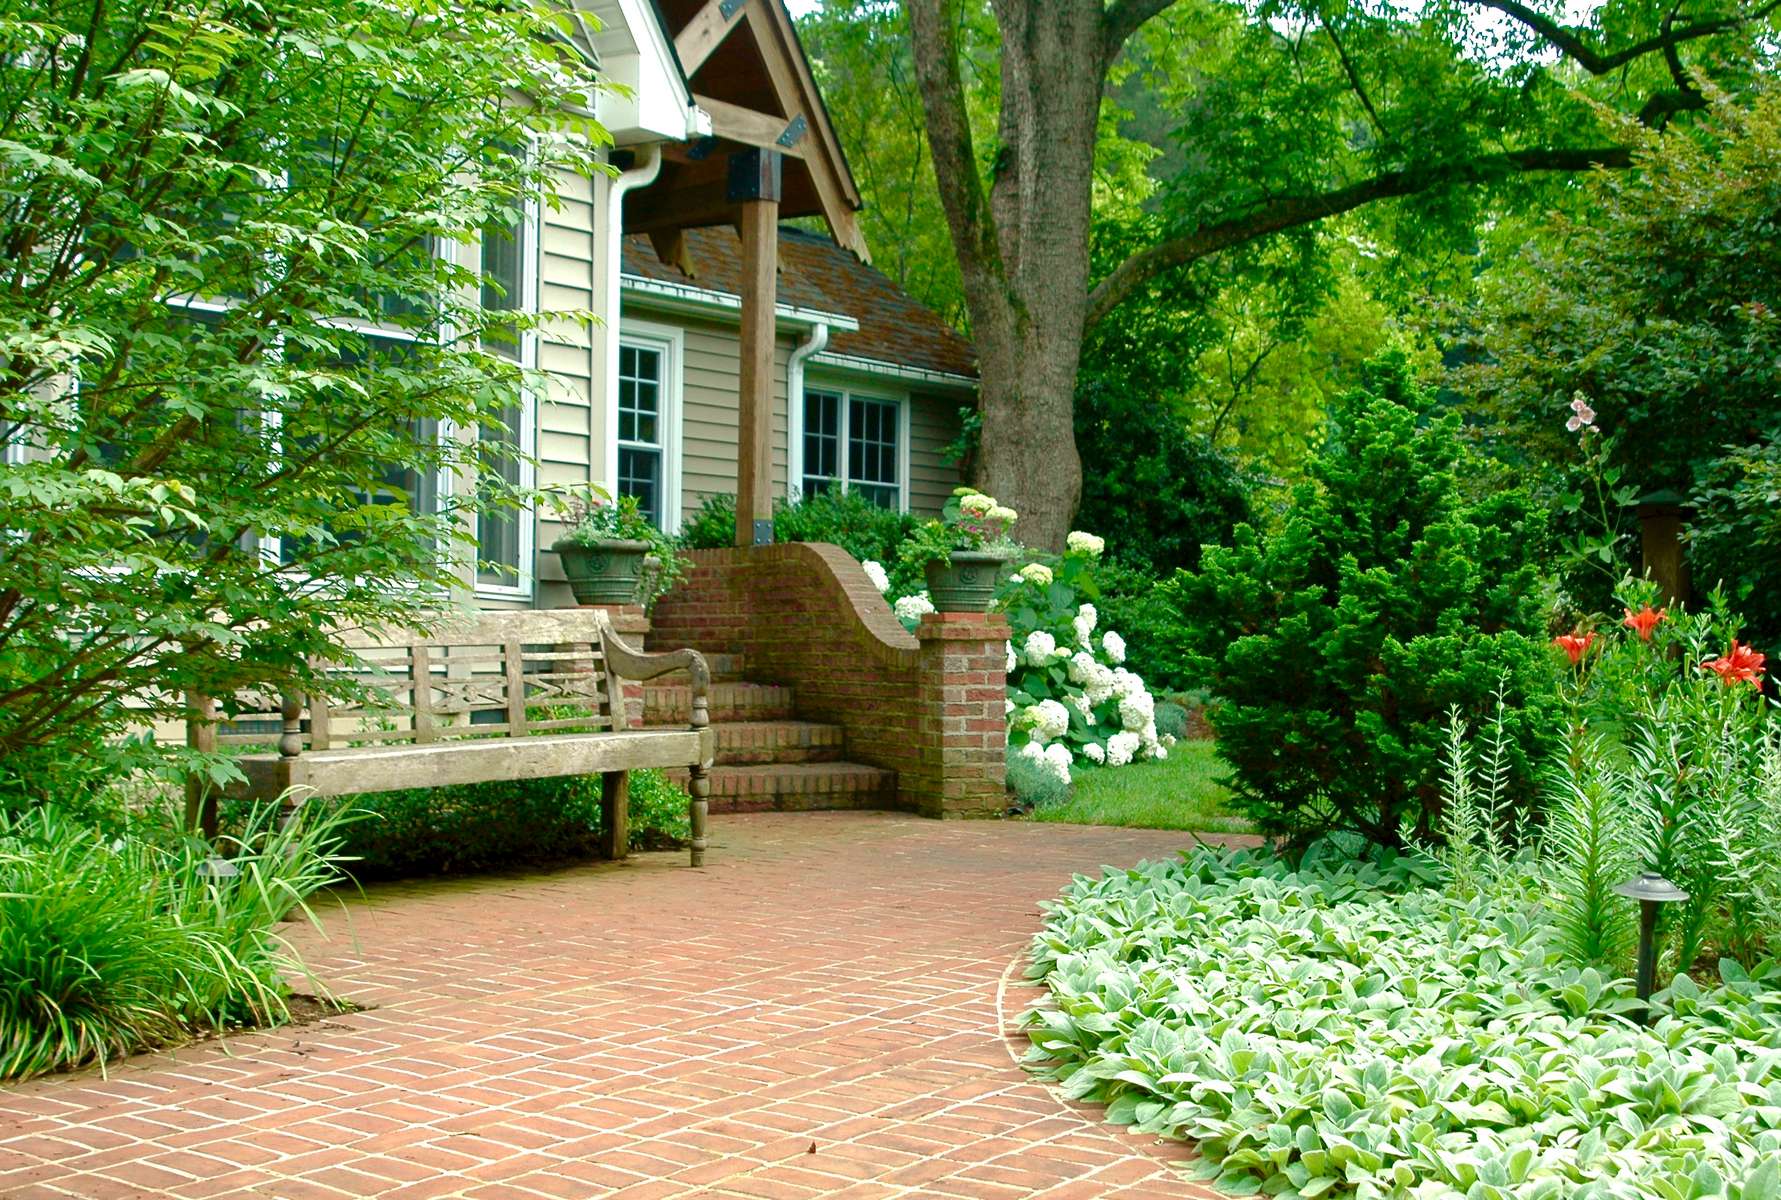 Solow Design Group Inc 2008, Residential Landscaping Charlotte Nc